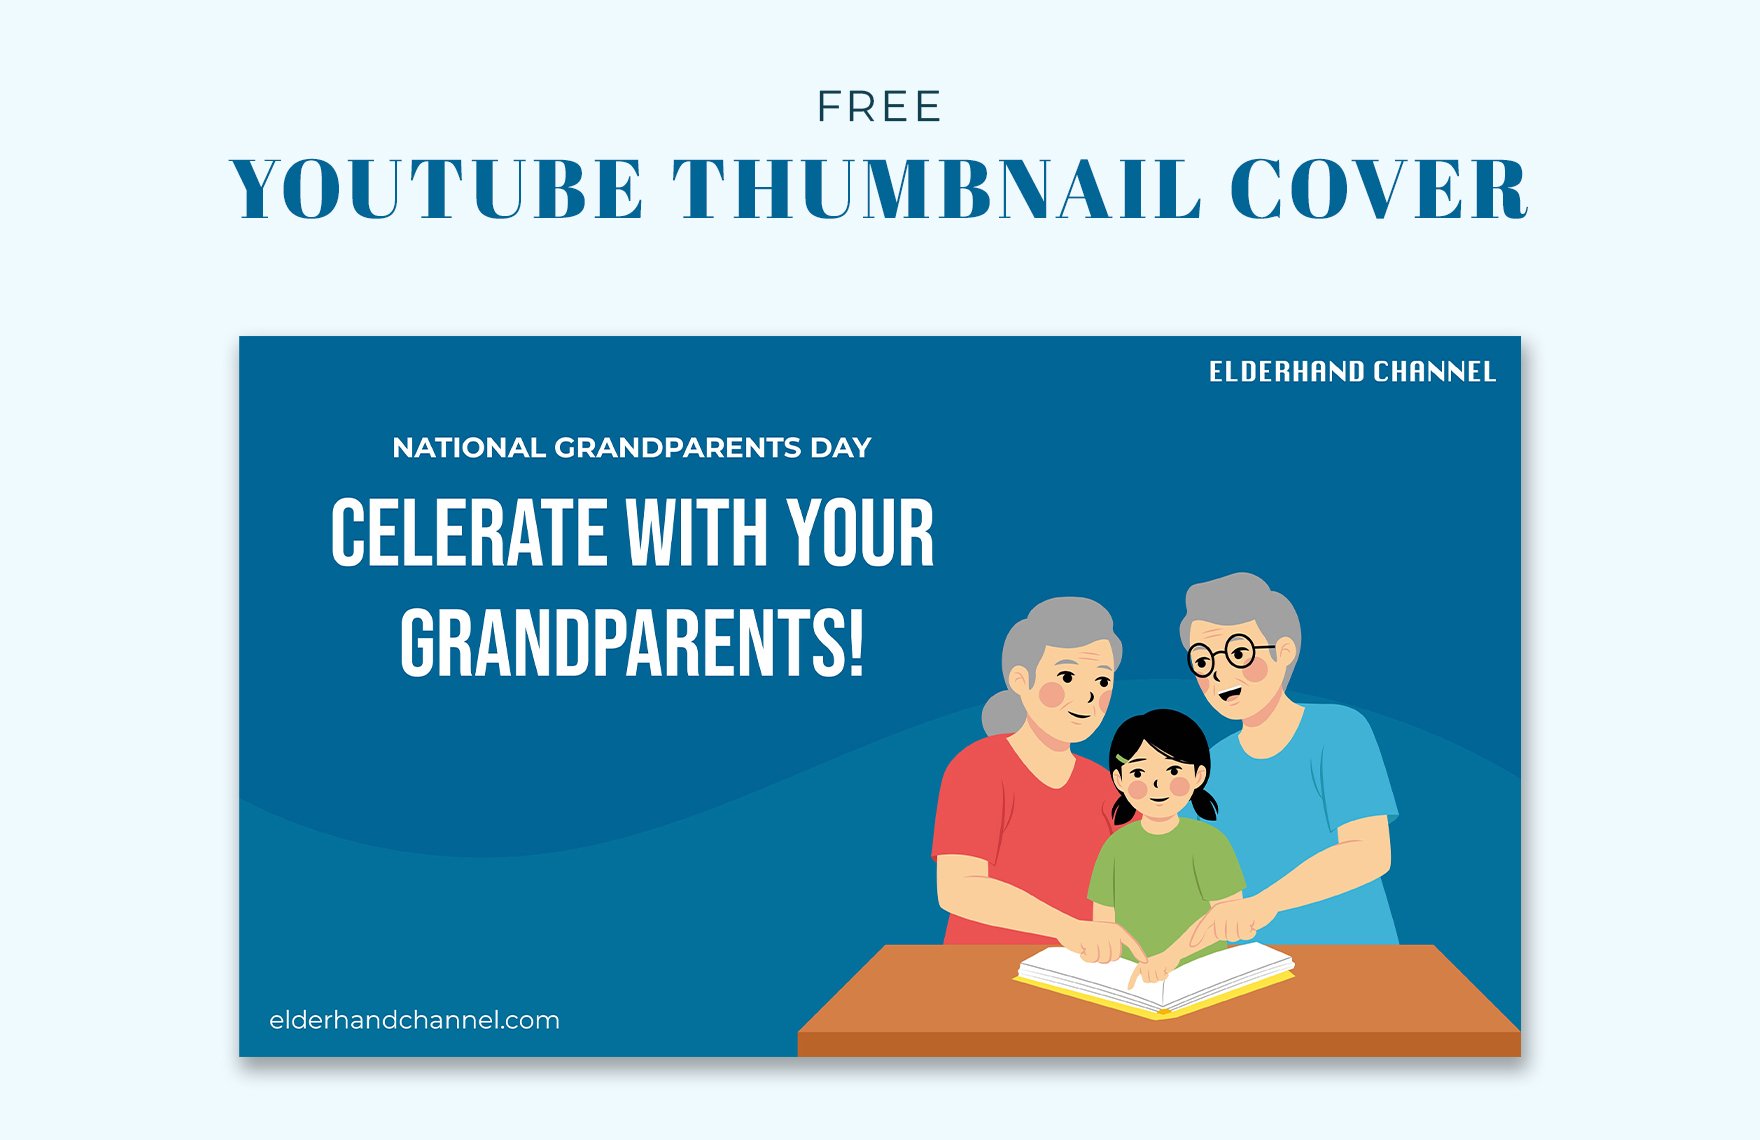 national-grandparents-day-youtube-thumbnail-cover